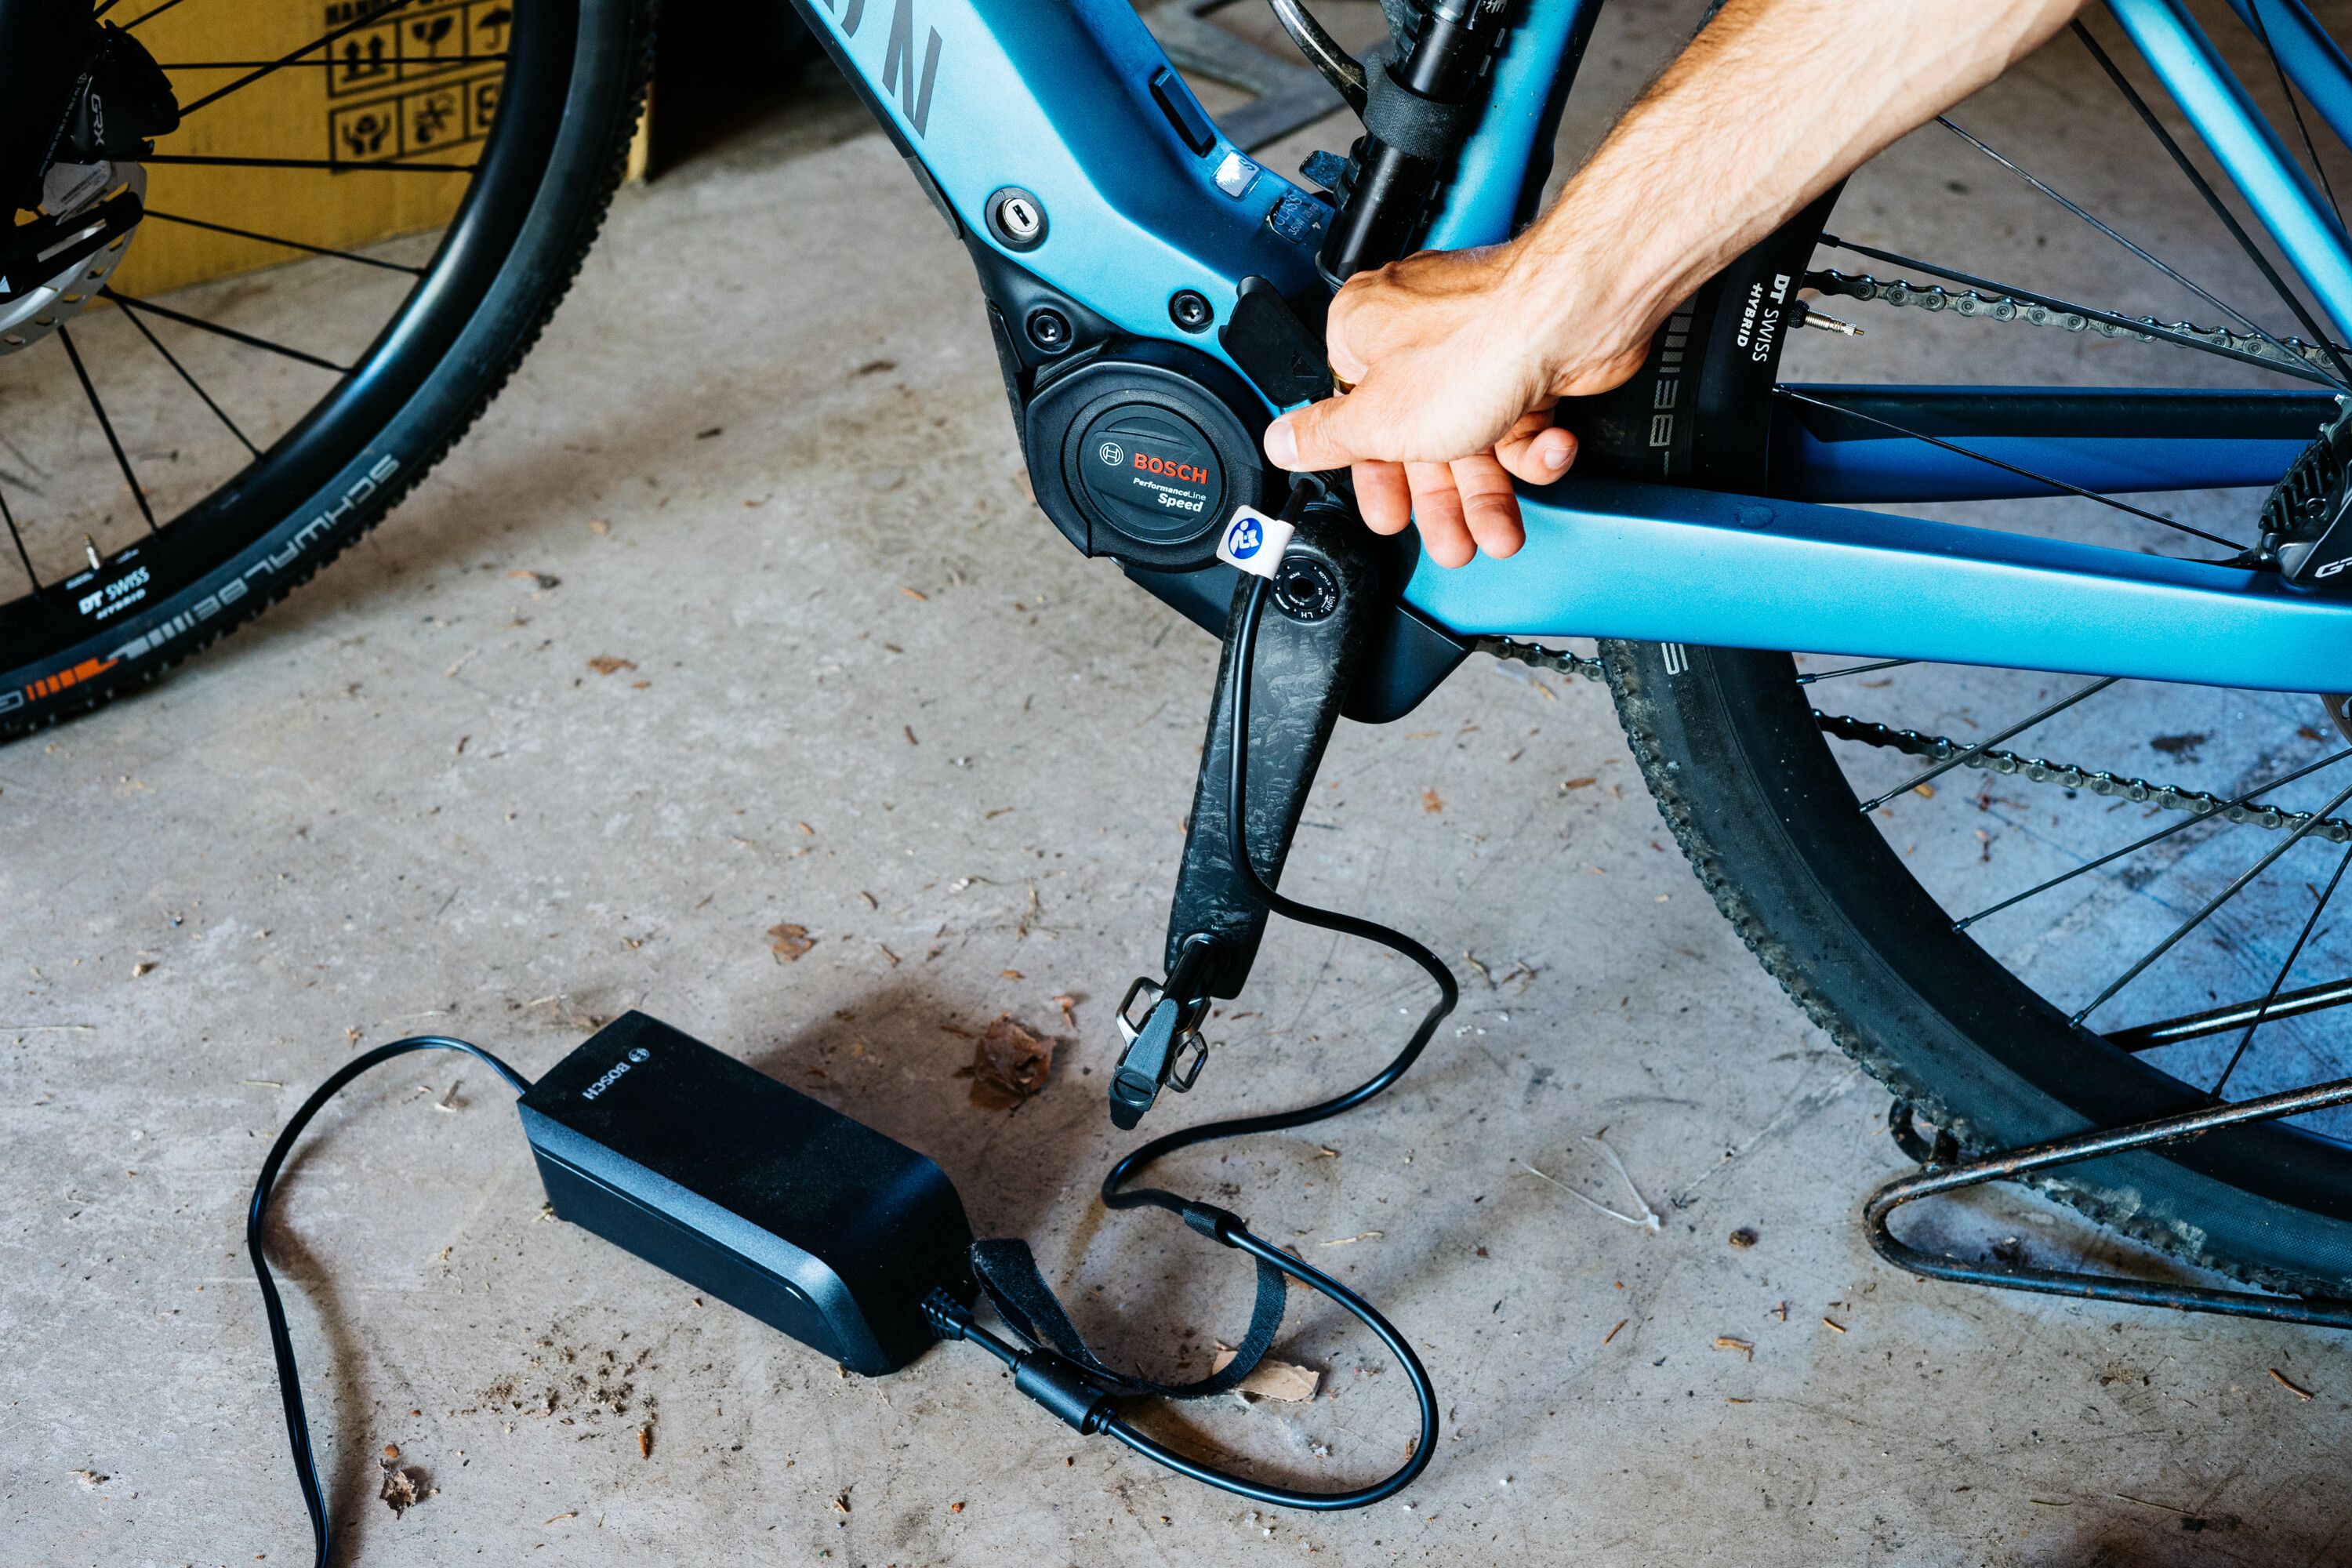 How long does it take to charge the battery of a hybrid e-bike?